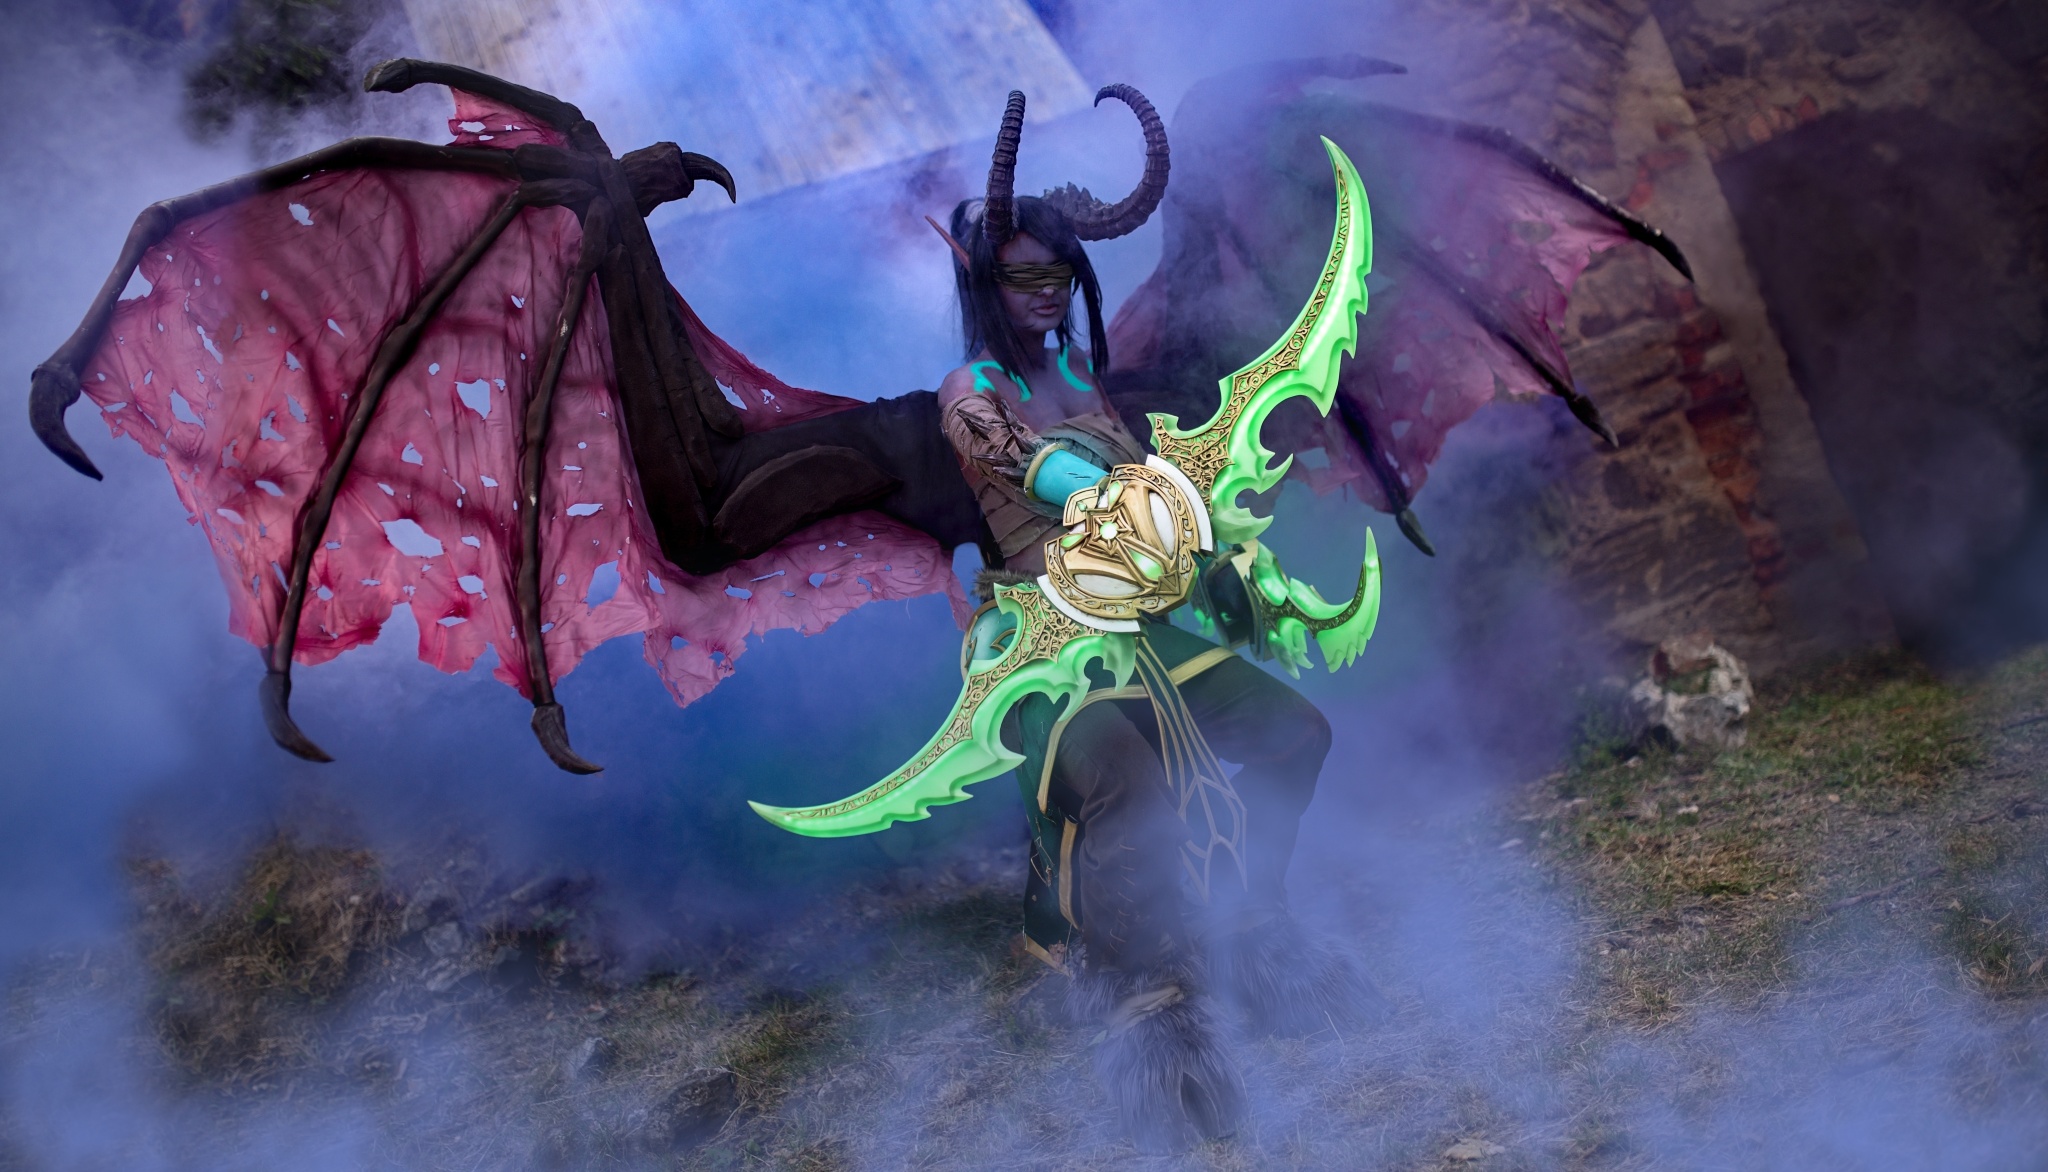 How to Photograph a Cosplay - Illidan cosplay